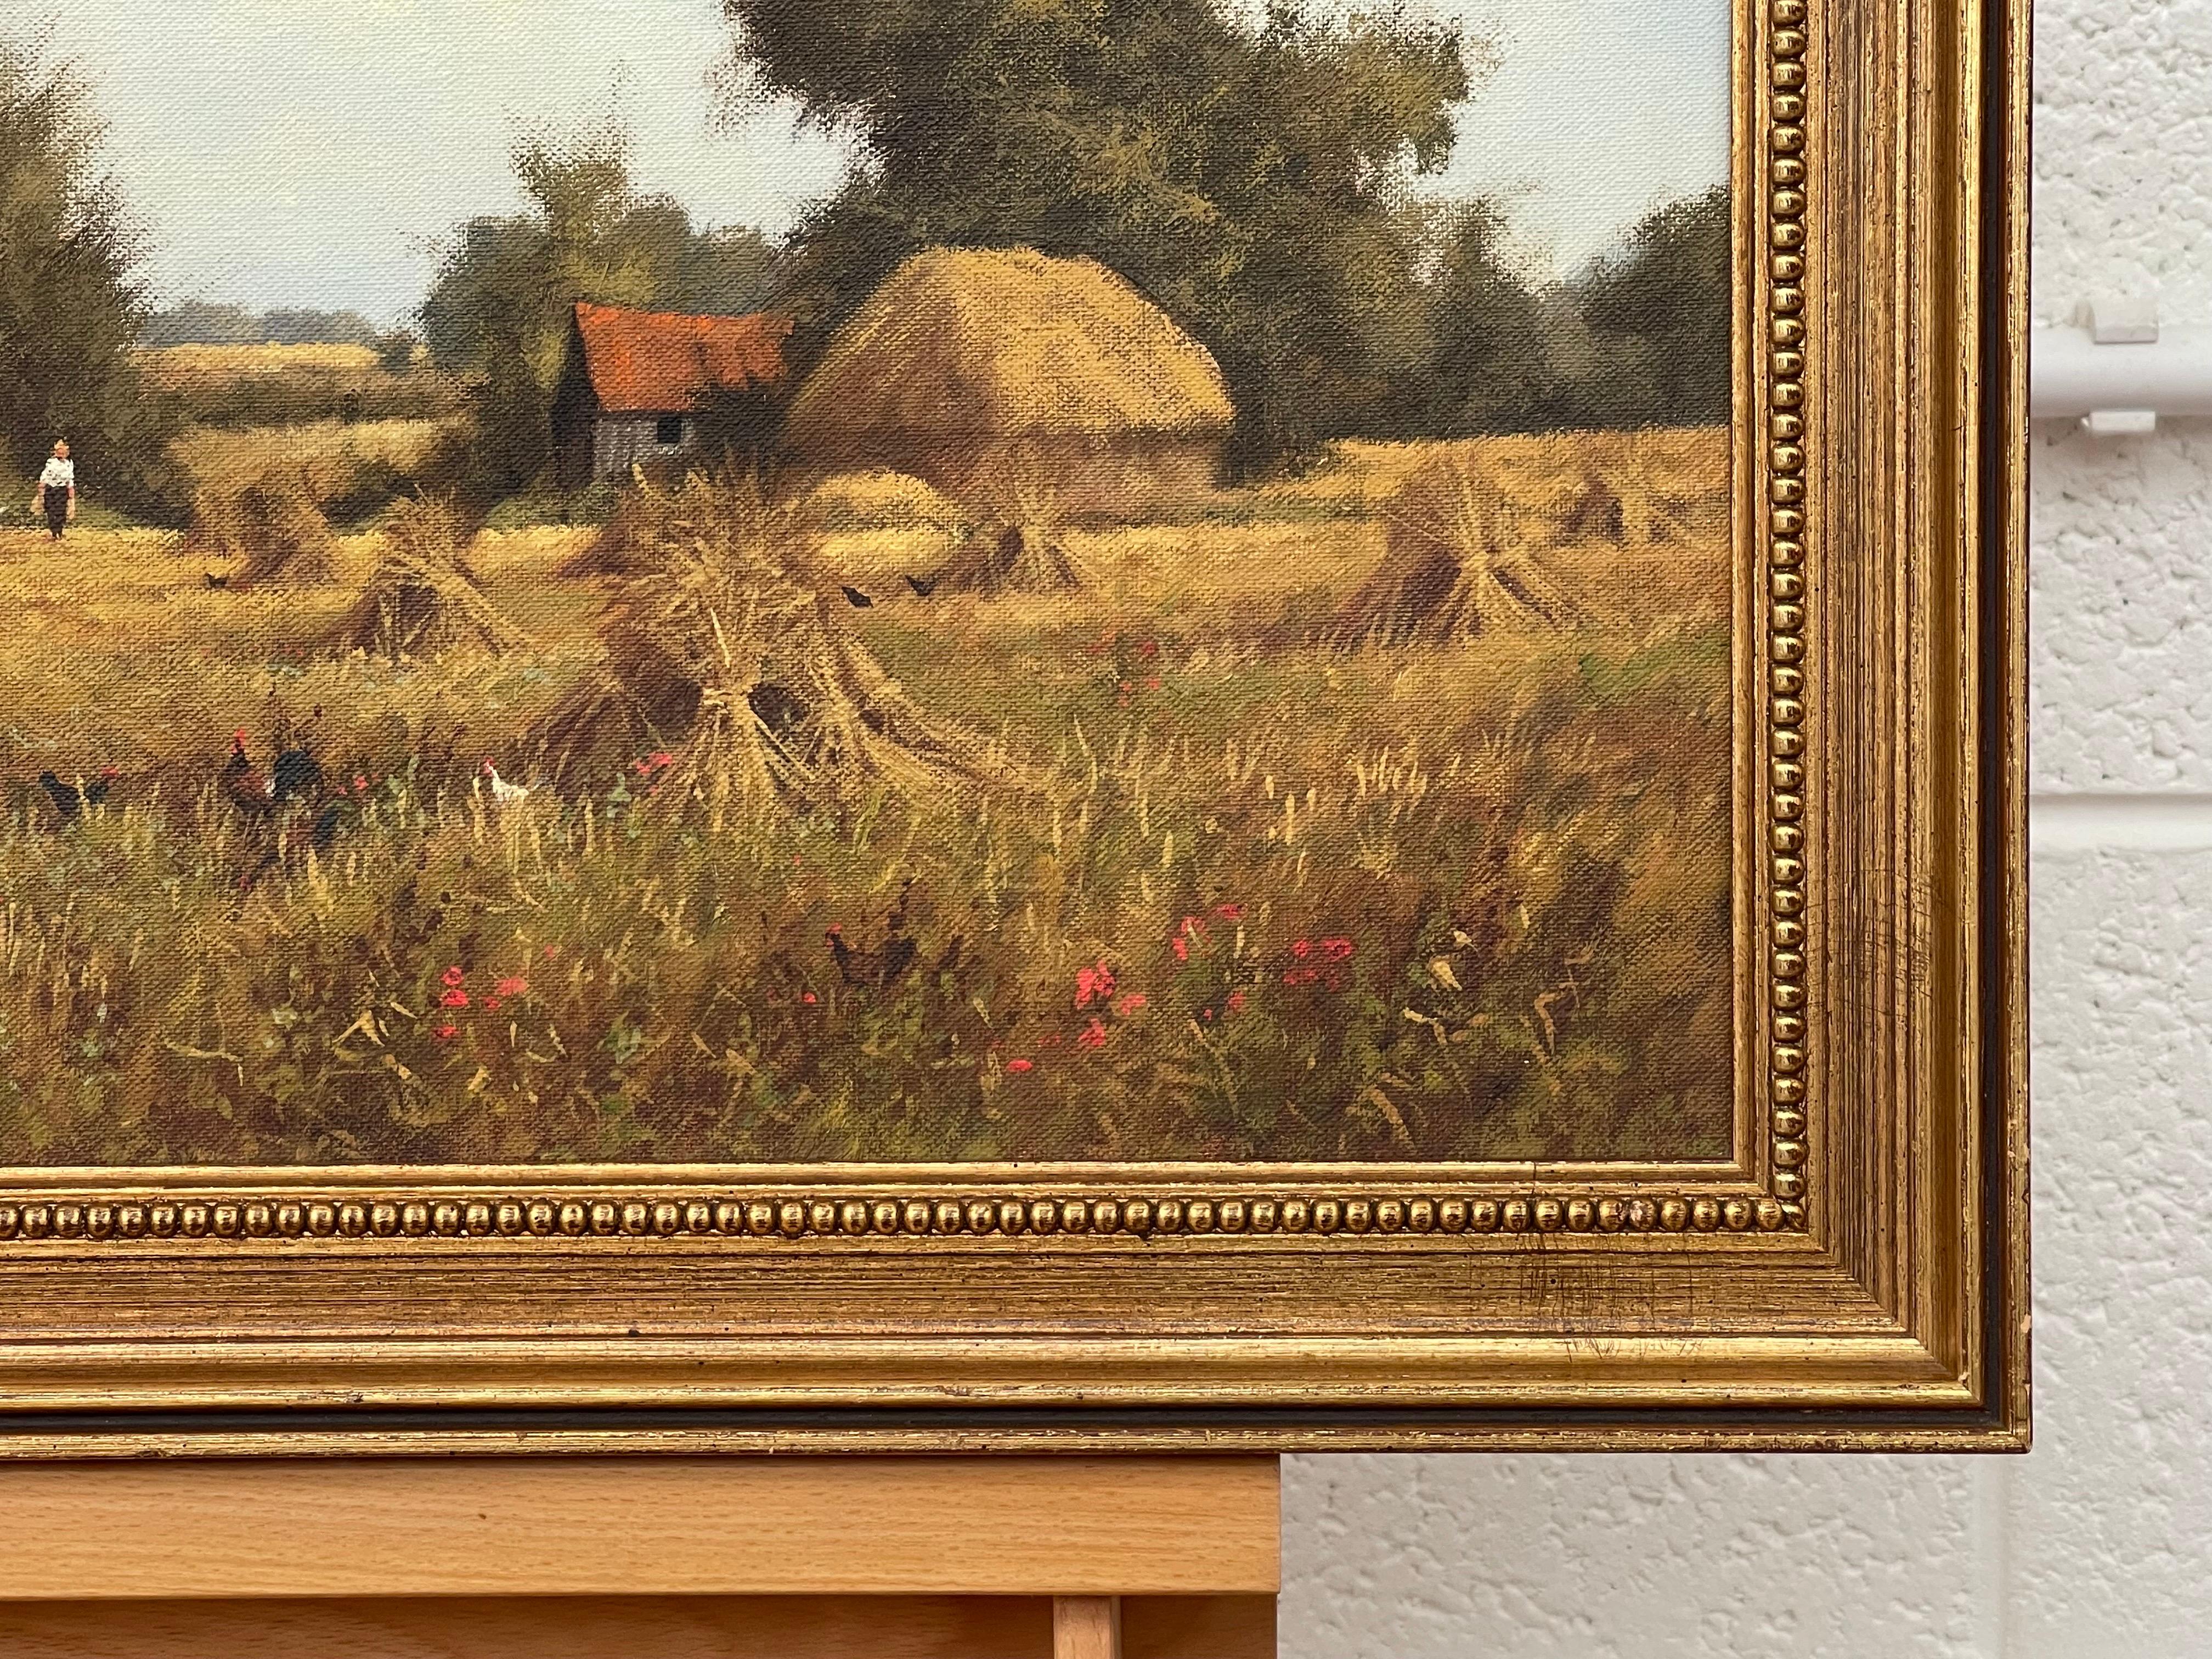 Farm Scene with Haystacks in the English Countryside by British Landscape Artist, James Wright. 
Signed, Original, Oil on Canvas, housed in a gilt frame

Art measures 24 x 15.5 inches
Frame measures 29 x 20 inches (approx.) 

James Wright was born